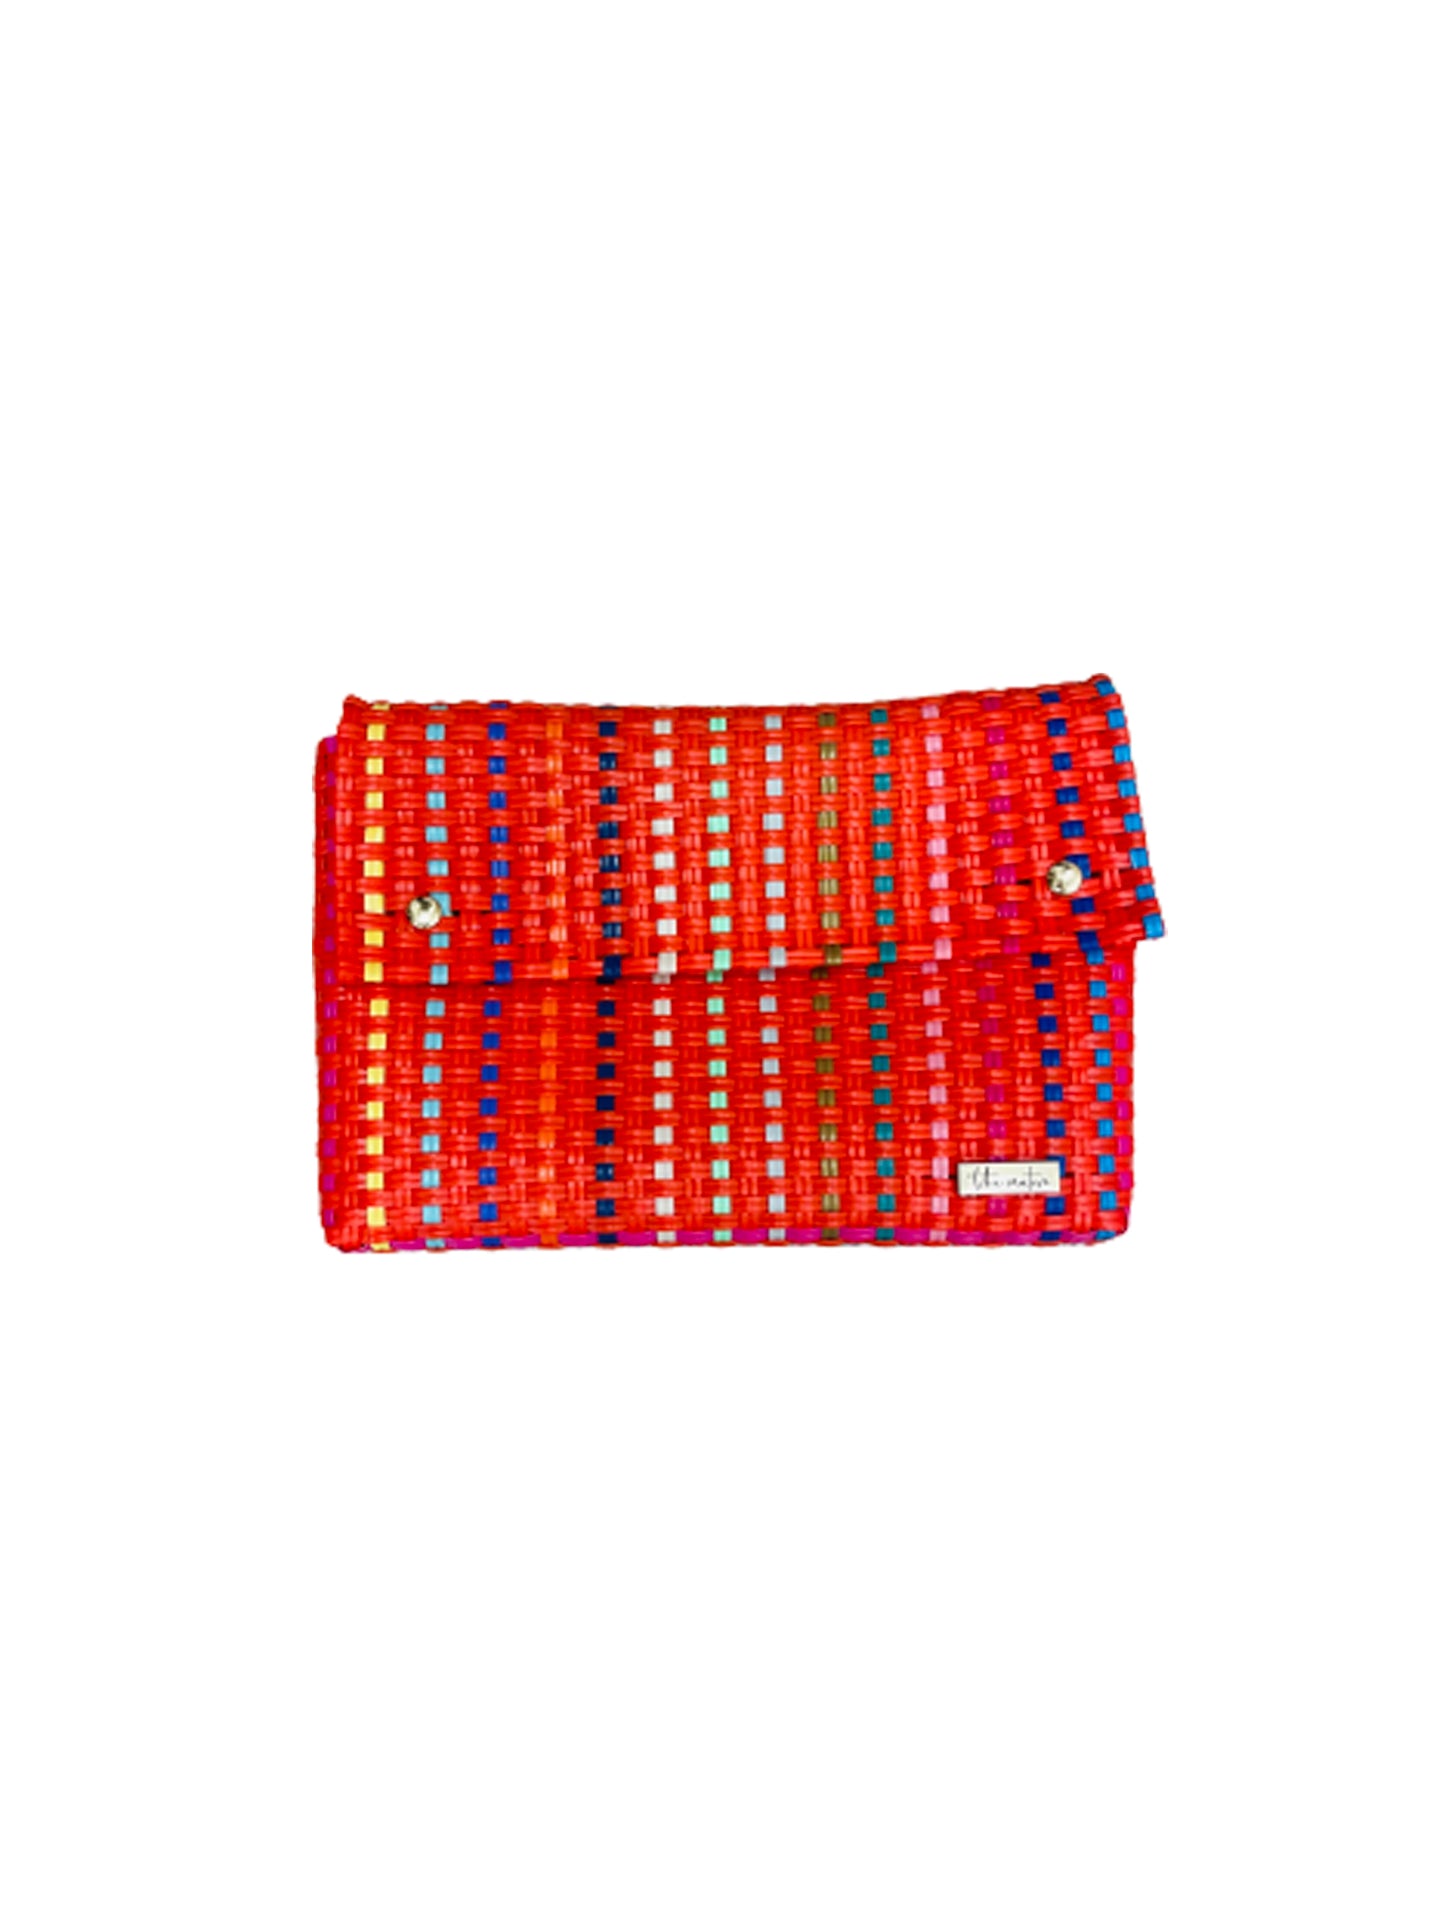 playa clutch colorful coral